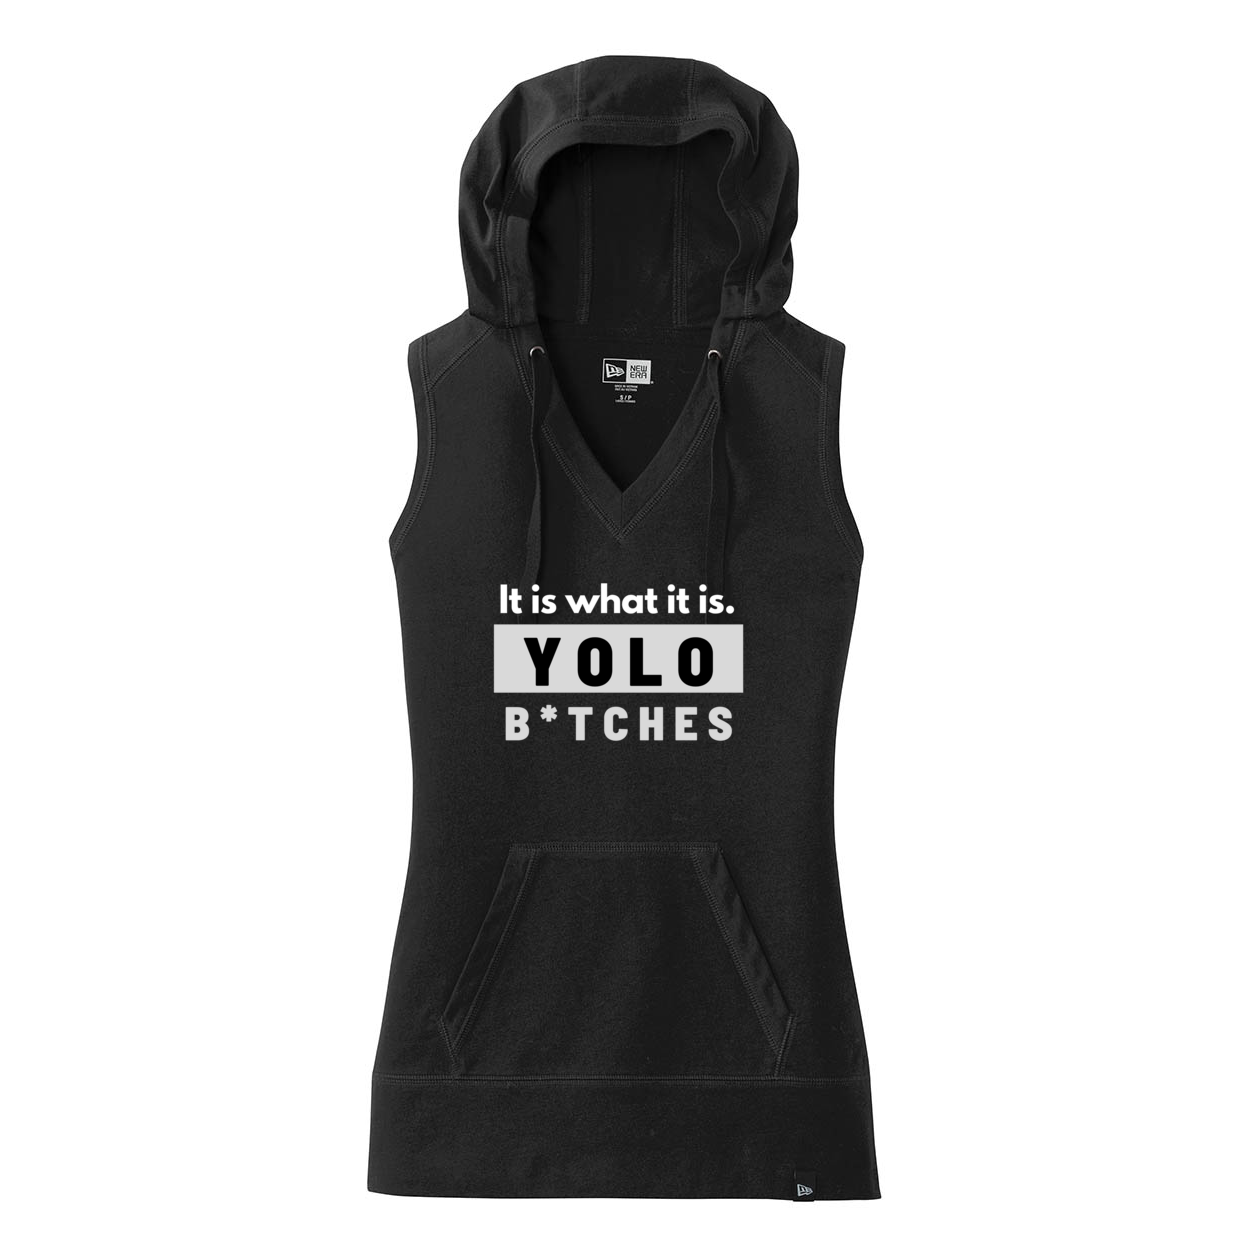 YOLO FITTED WOMEN'S " YOLO B*TCHES, IT IS WHAT IT IS" HOODIE TANK